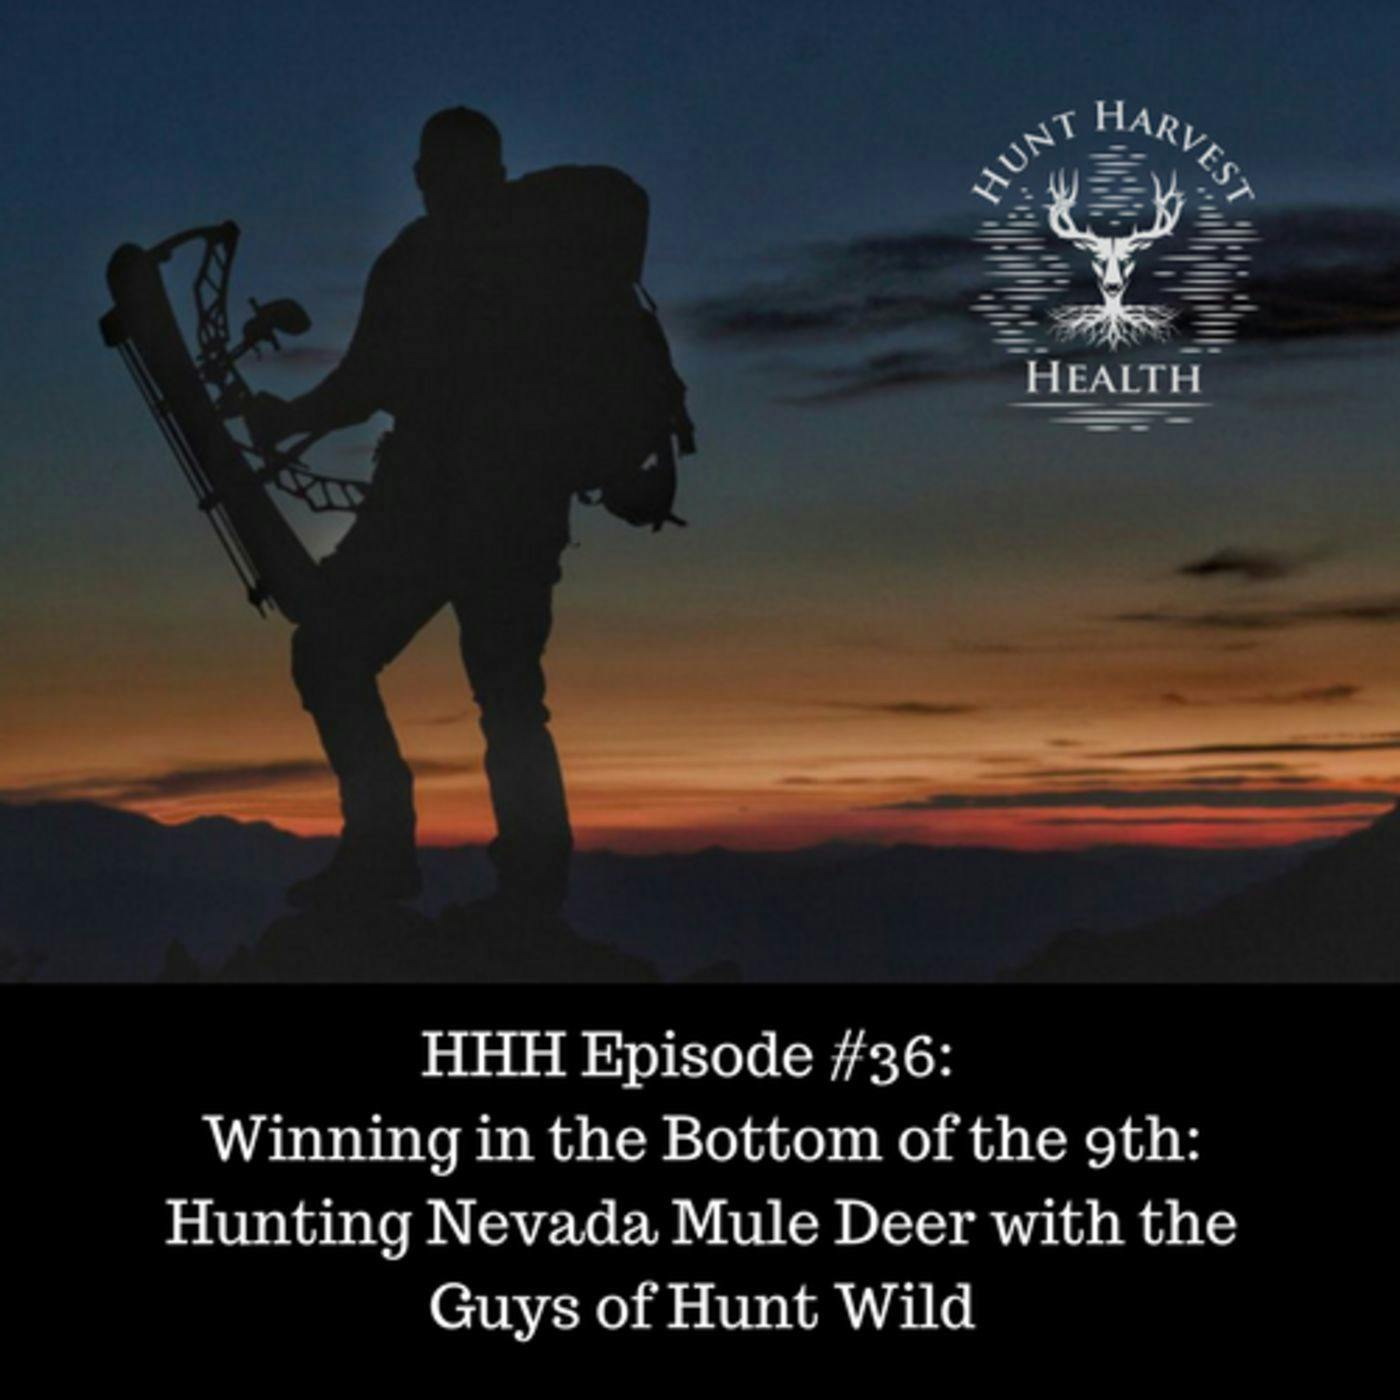 Episode #36:   Winning in the Bottom of the 9th: Hunting Nevada Mule Deer with the Guys of Hunt Wild